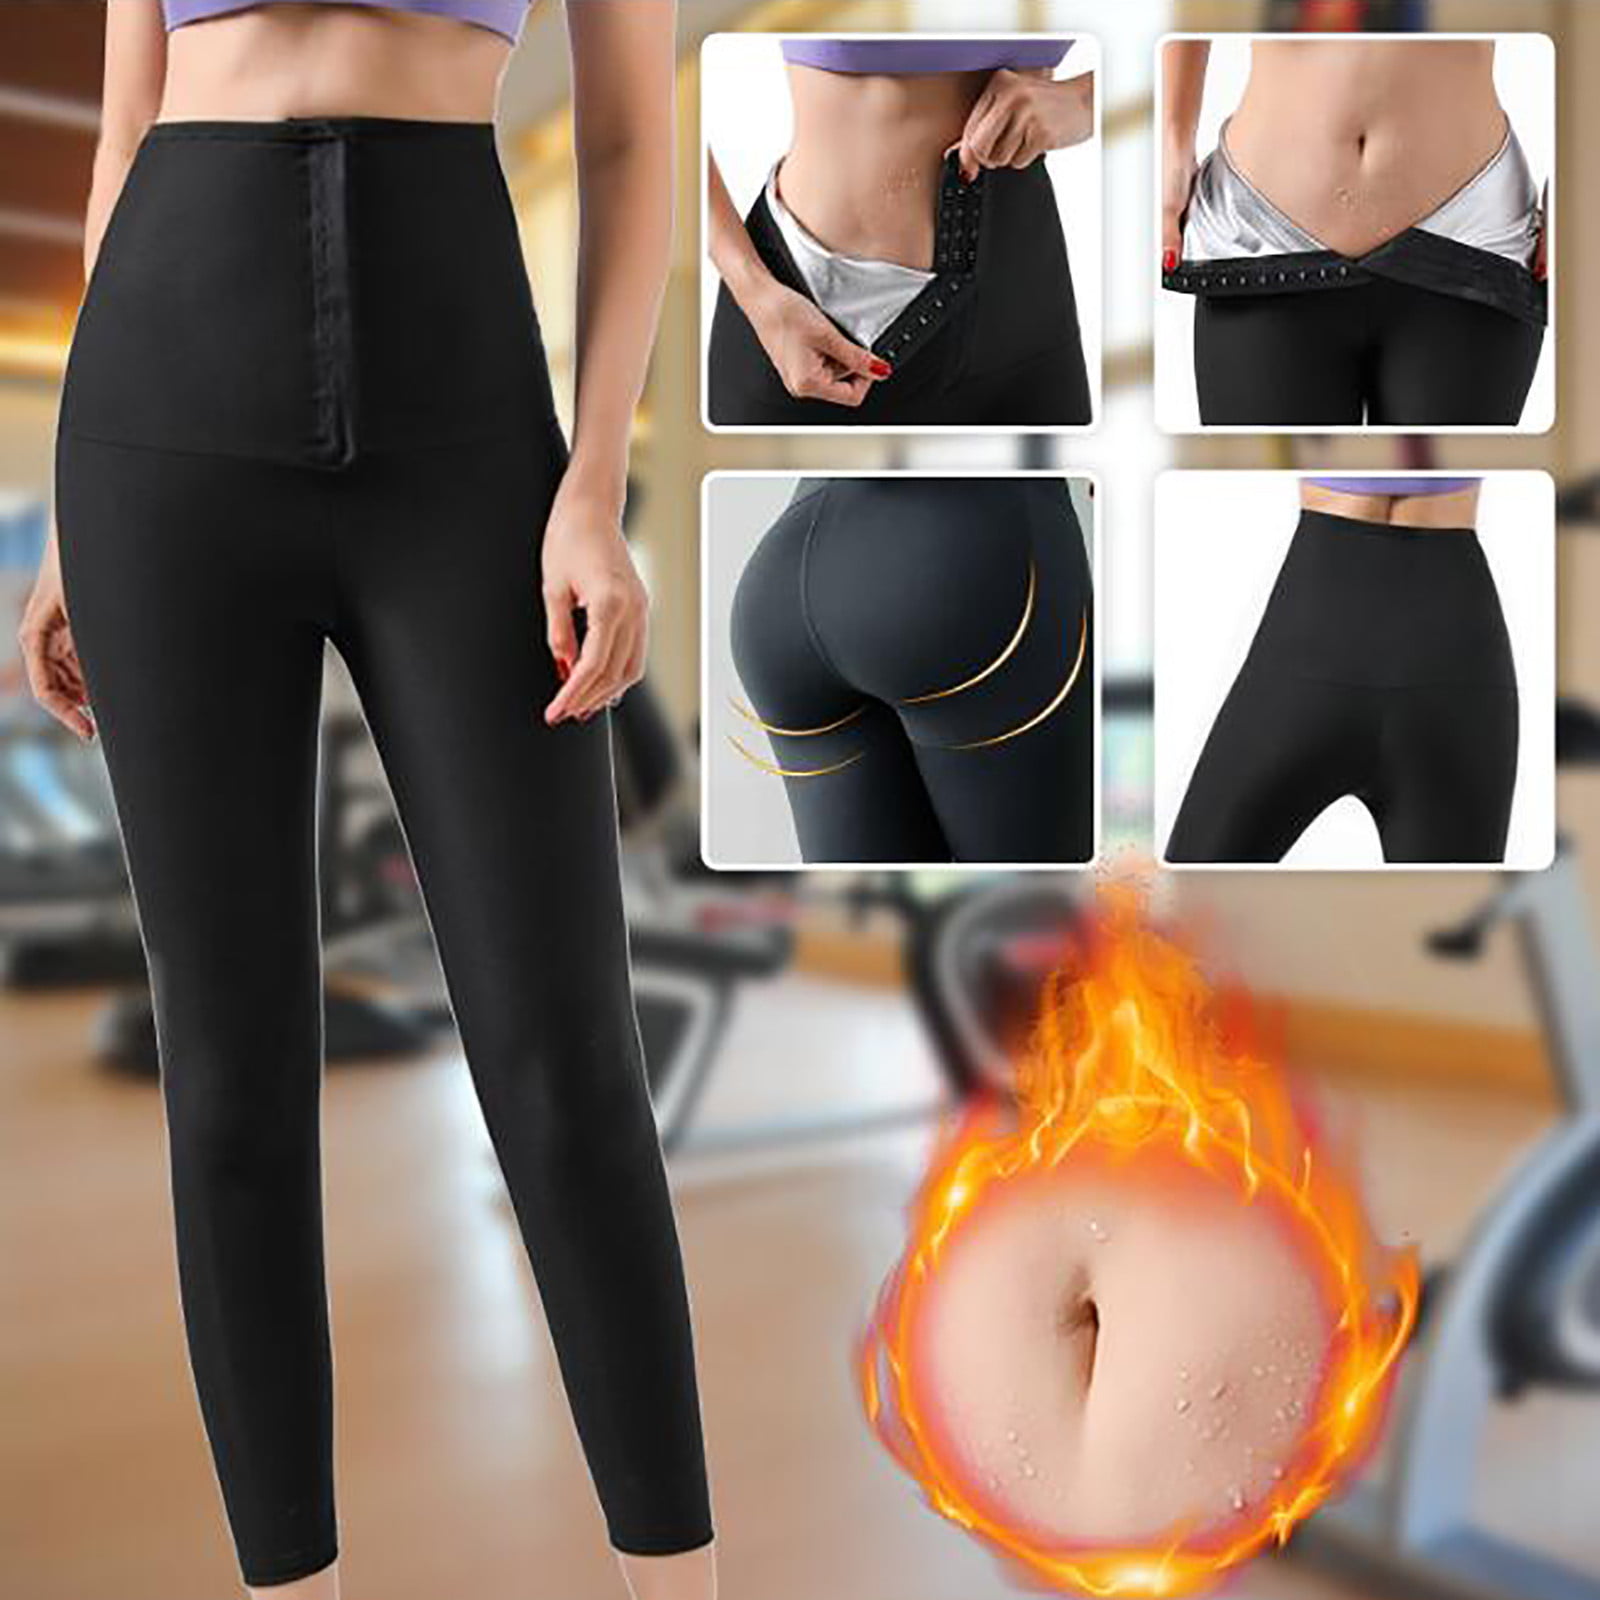 Sauna Sweat Shapewear High Waisted Leggings/Shorts Pants for Women,Hot Thermo Slimming Workout Leggings,Trainer Weight Loss Lower Body Shaper Sweatsuit Exercise Fitness Gym